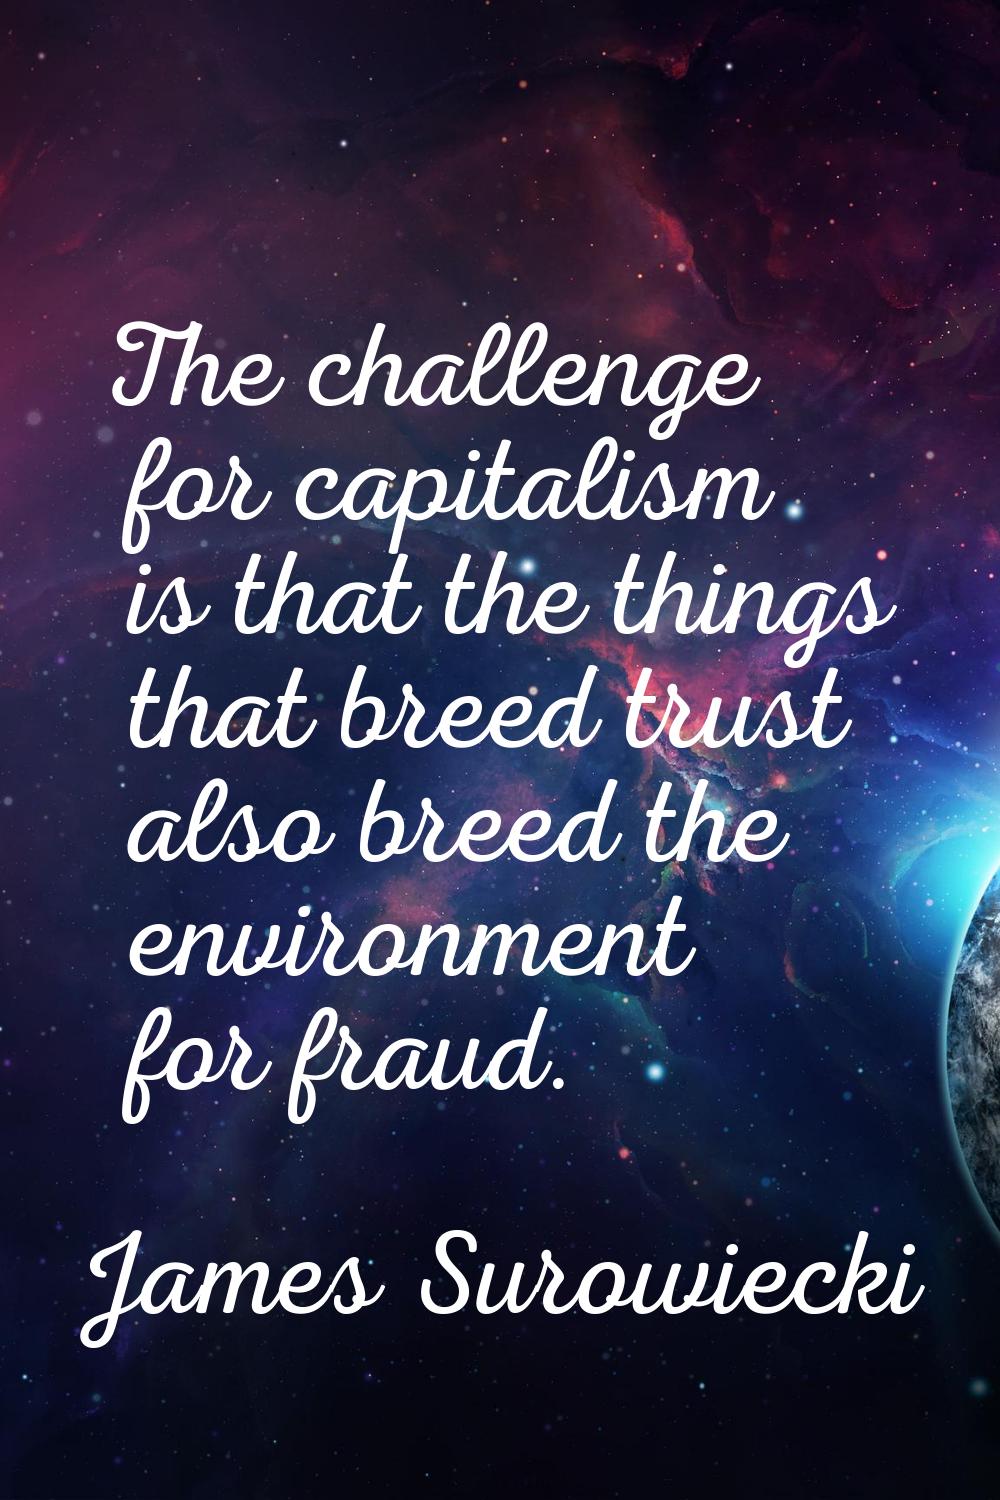 The challenge for capitalism is that the things that breed trust also breed the environment for fra